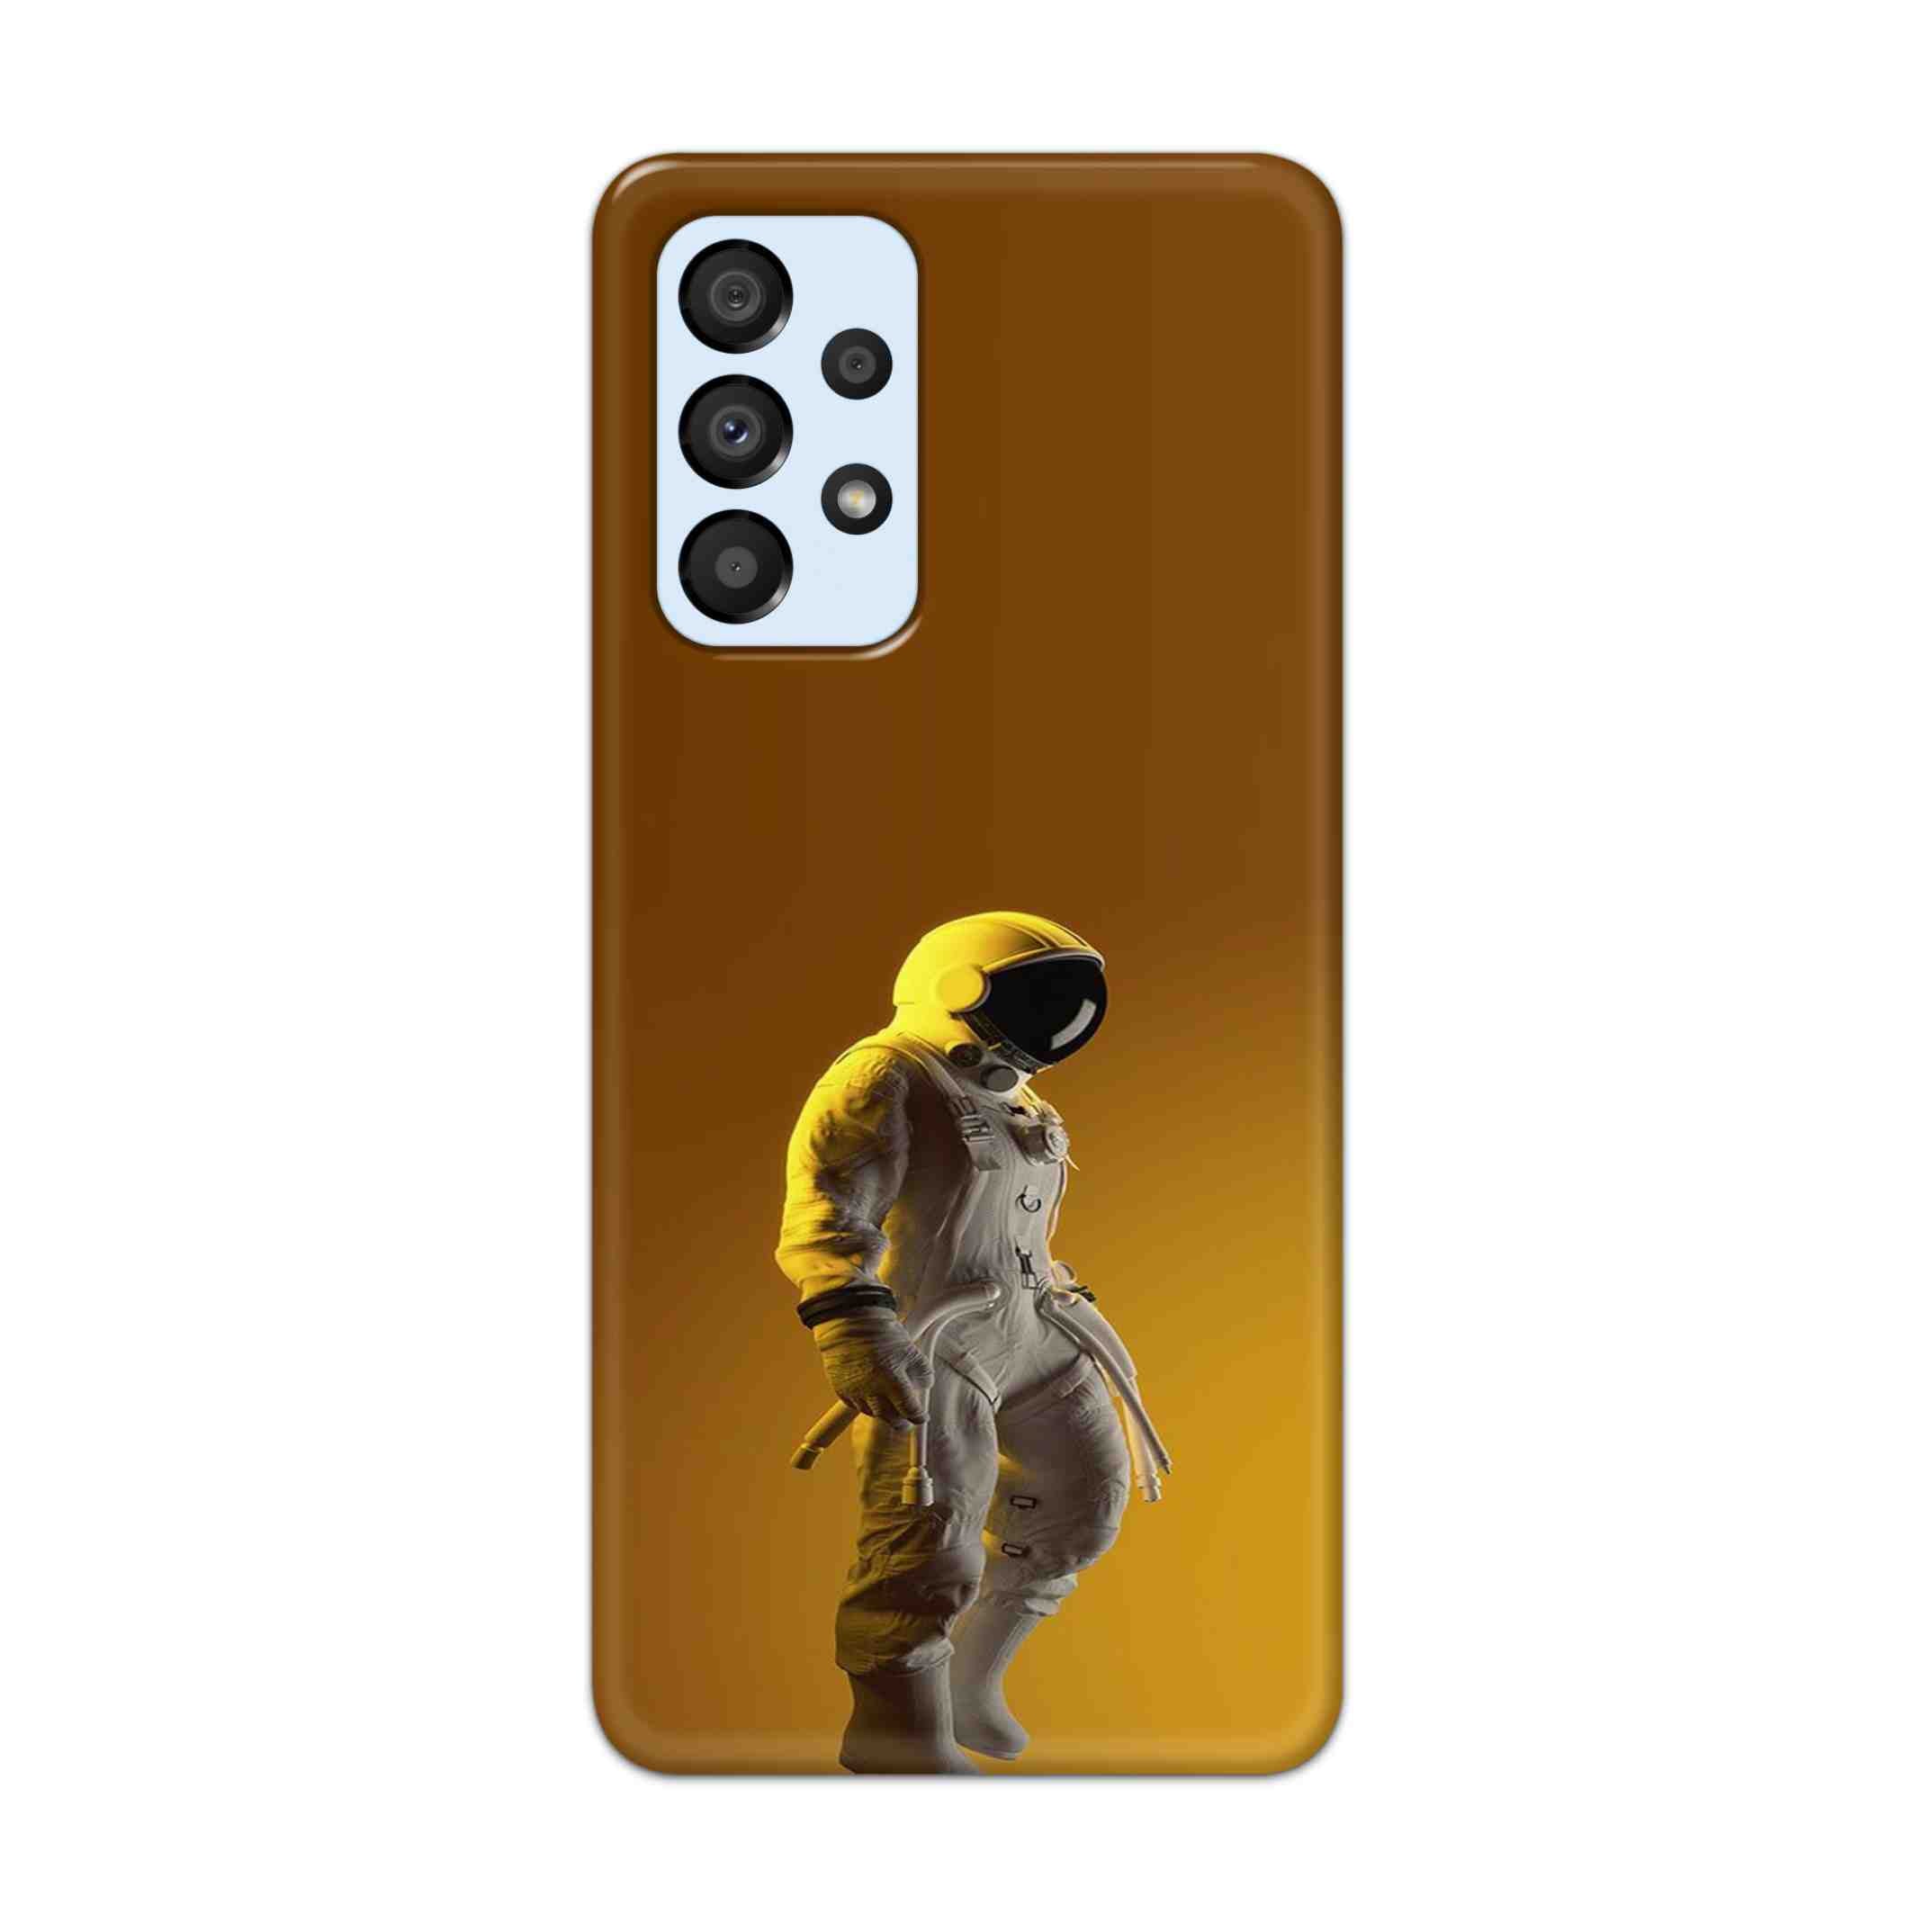 Buy Yellow Astronaut Hard Back Mobile Phone Case Cover For Samsung A33 5G Online